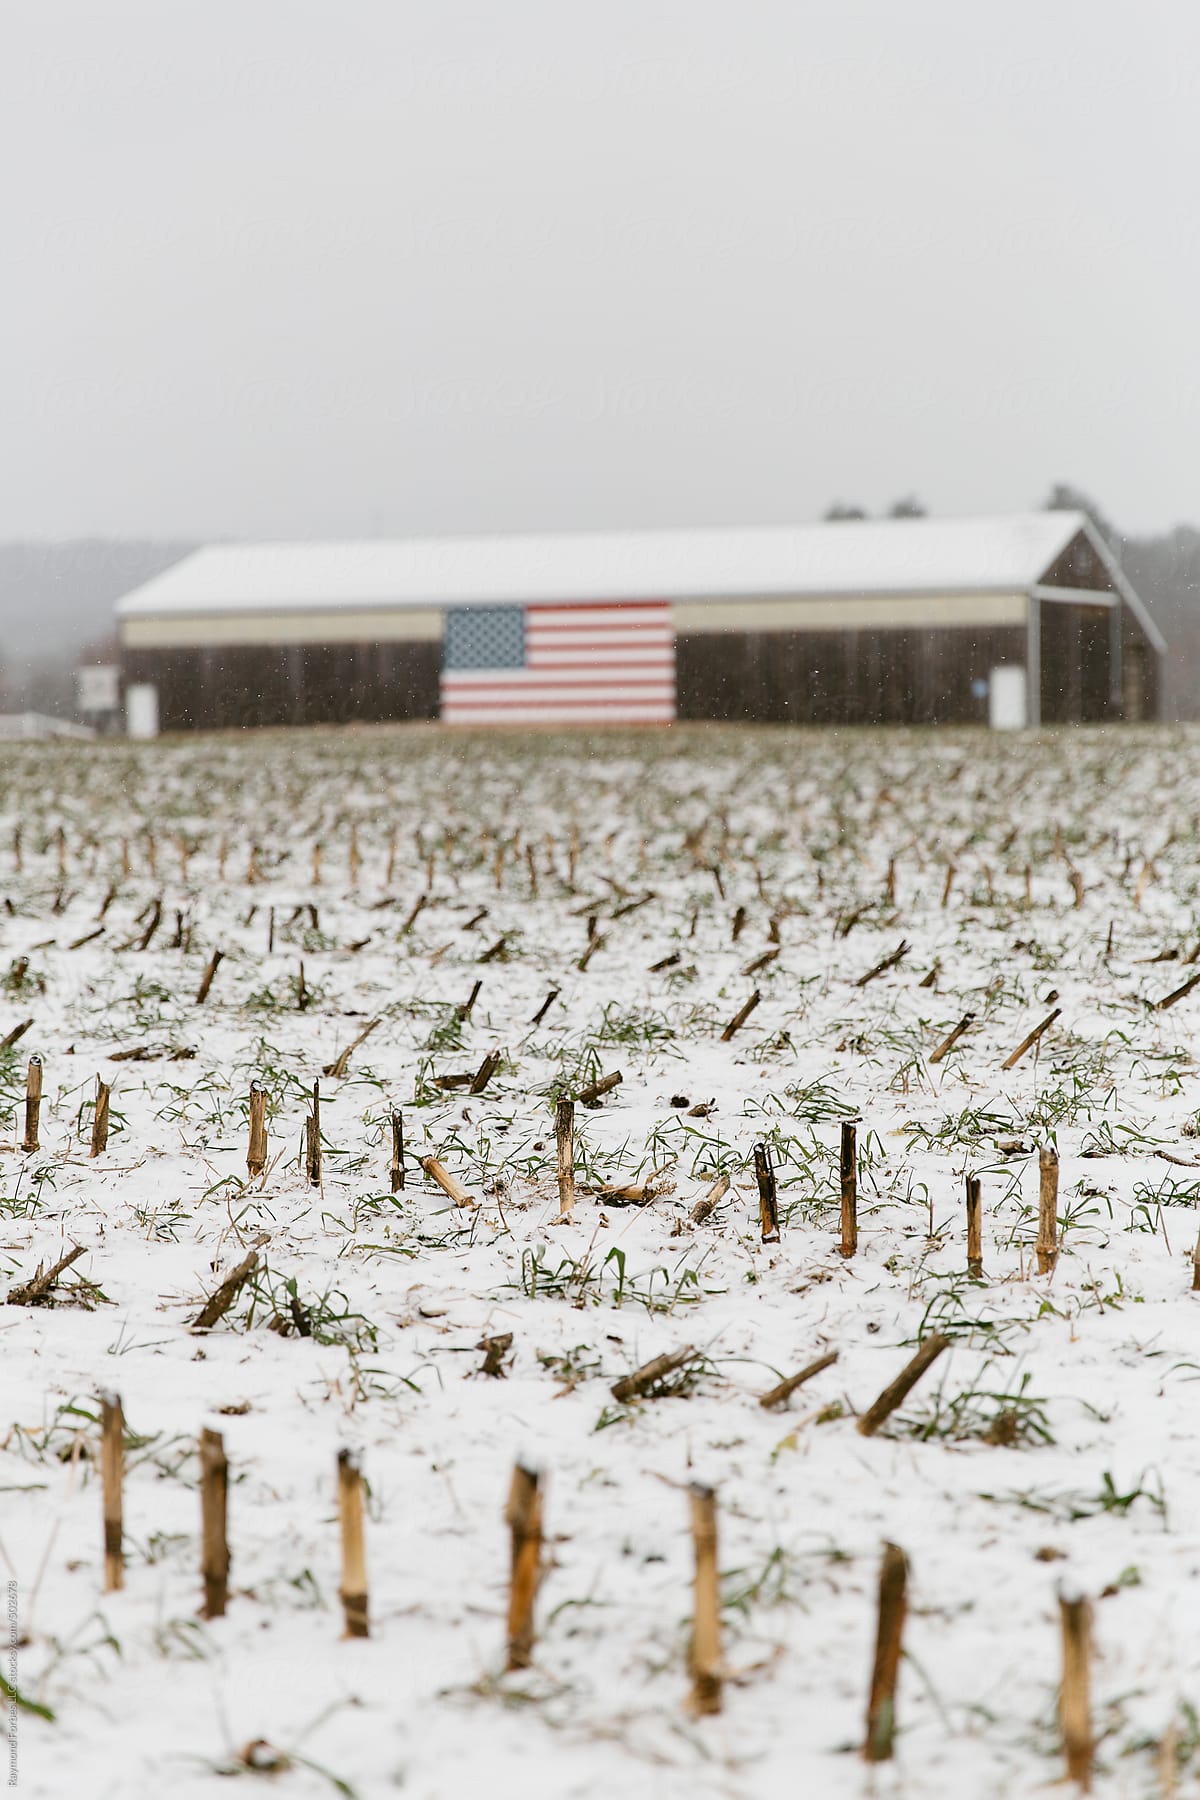 Rural Barn In Winter with American Flag